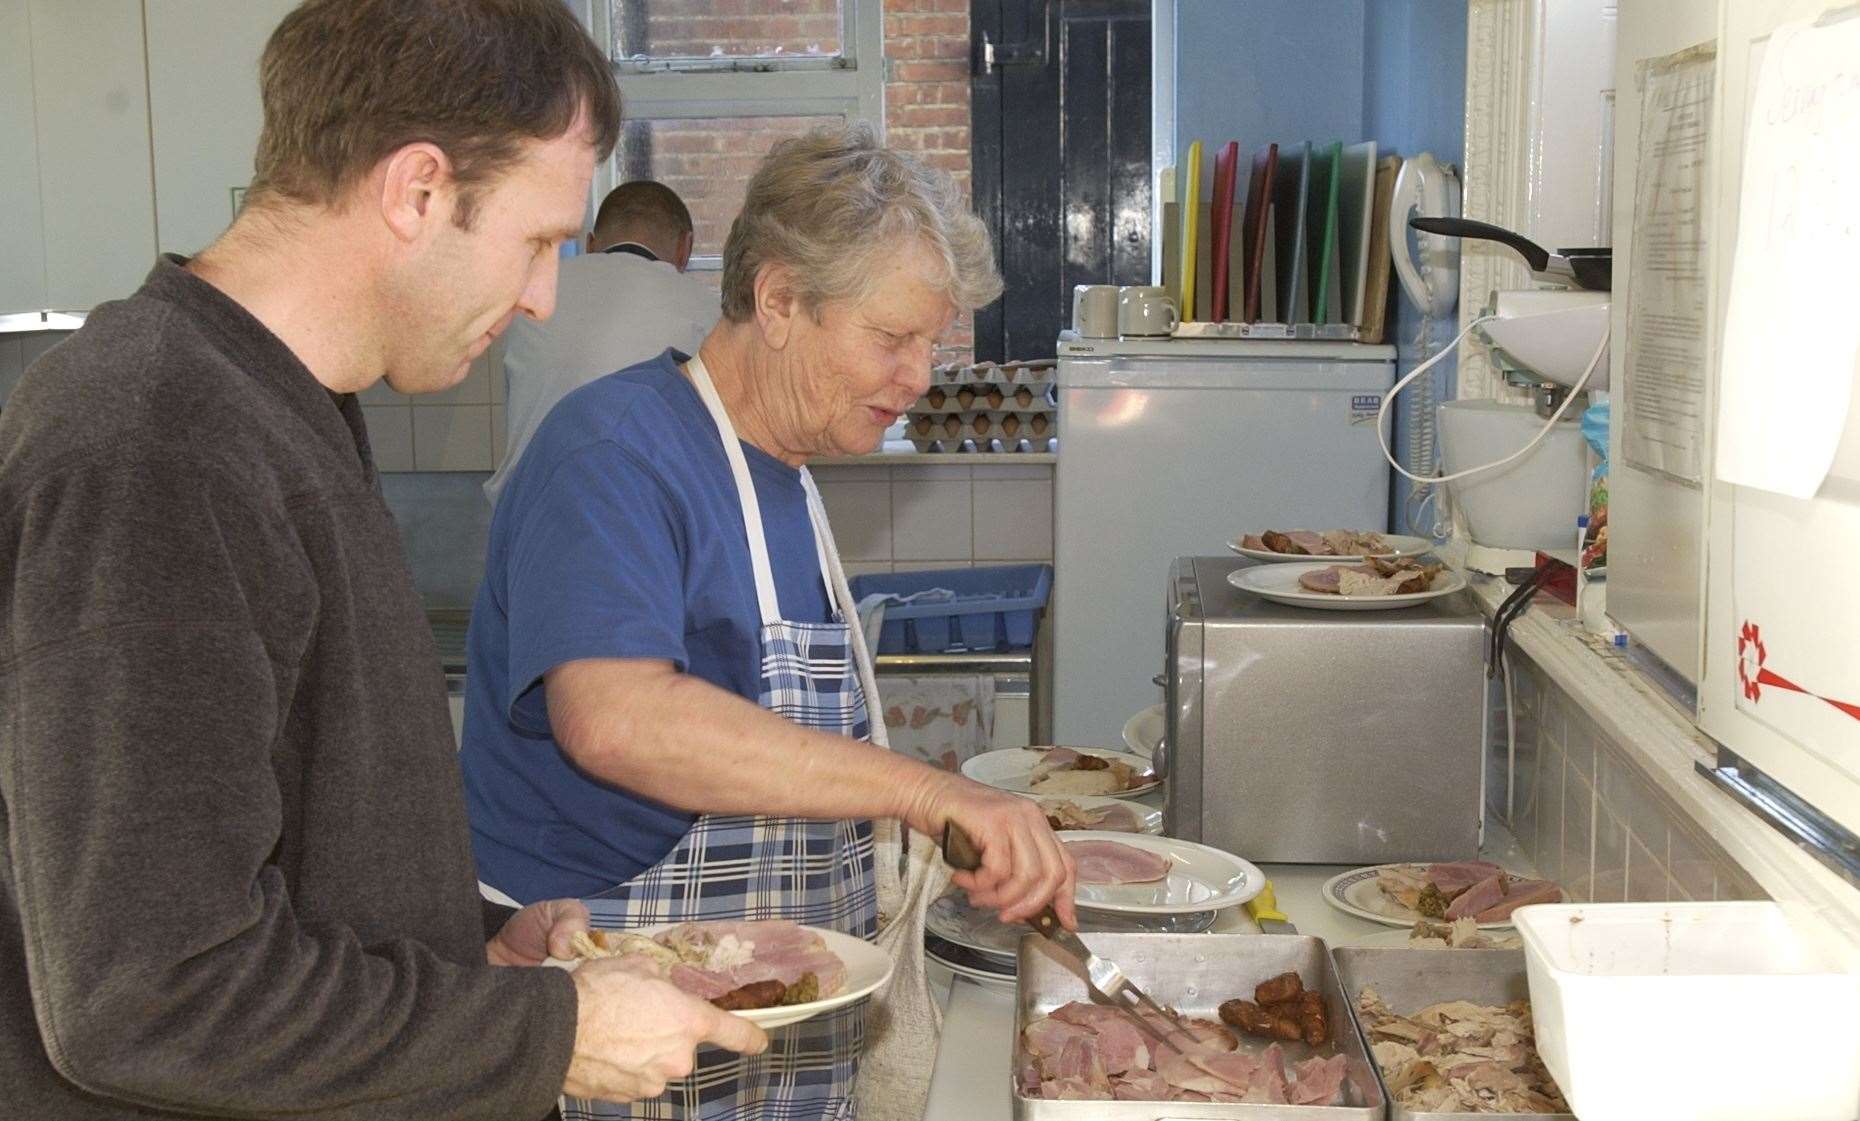 In 2001, a cook at Homeless Care, Mary Harvey, and helper Ian Edwards, prepare festive meals for the homeless